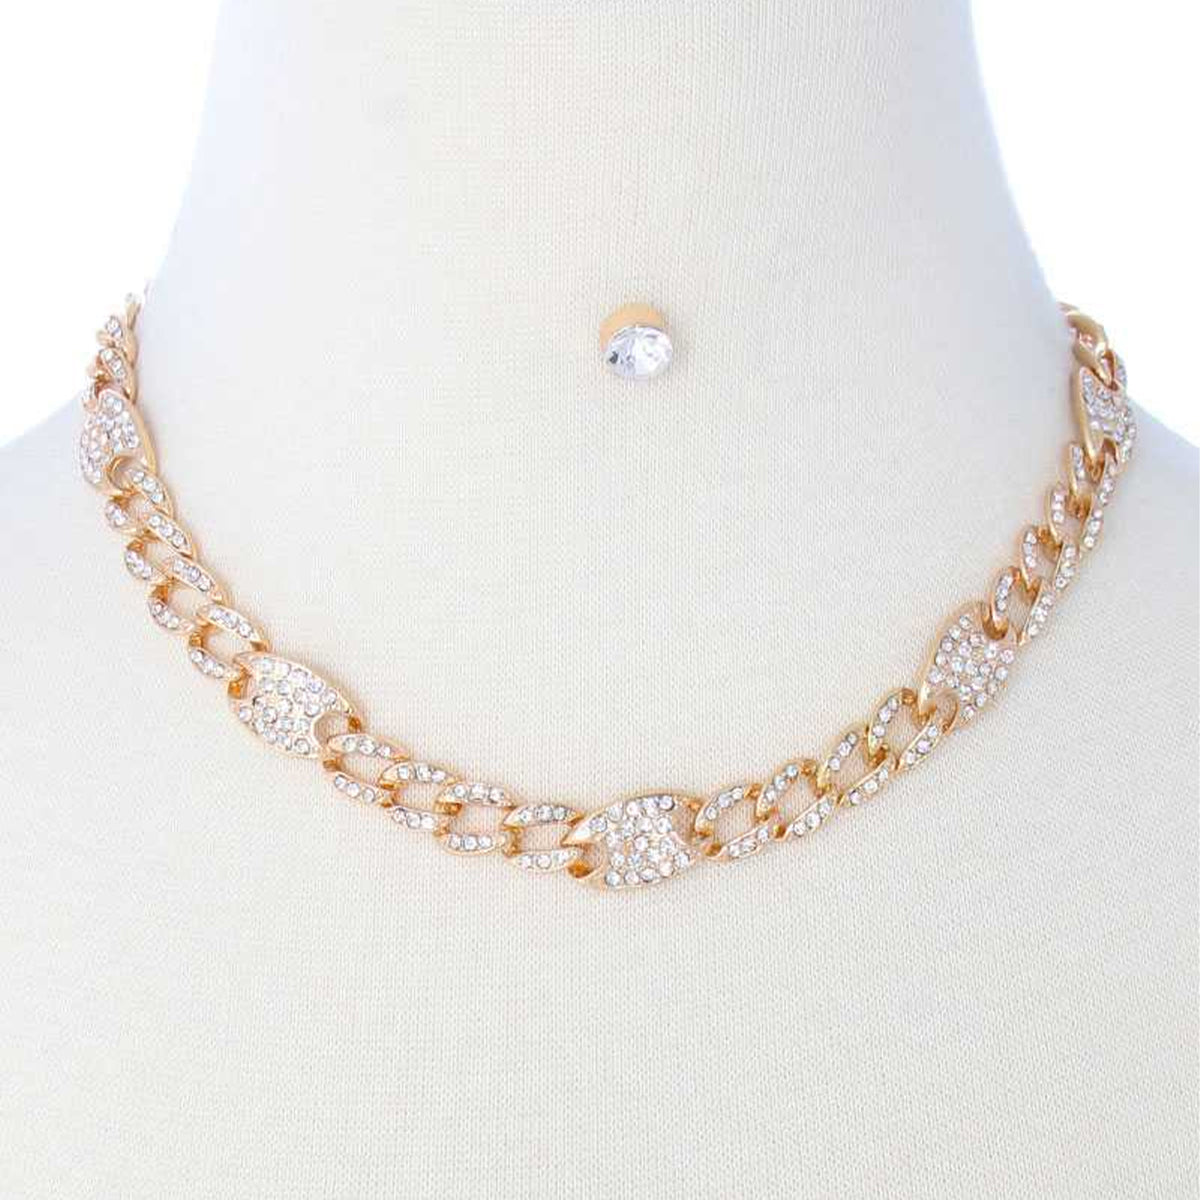 Gold Rhinestone Pave Chain Necklace Earring Set